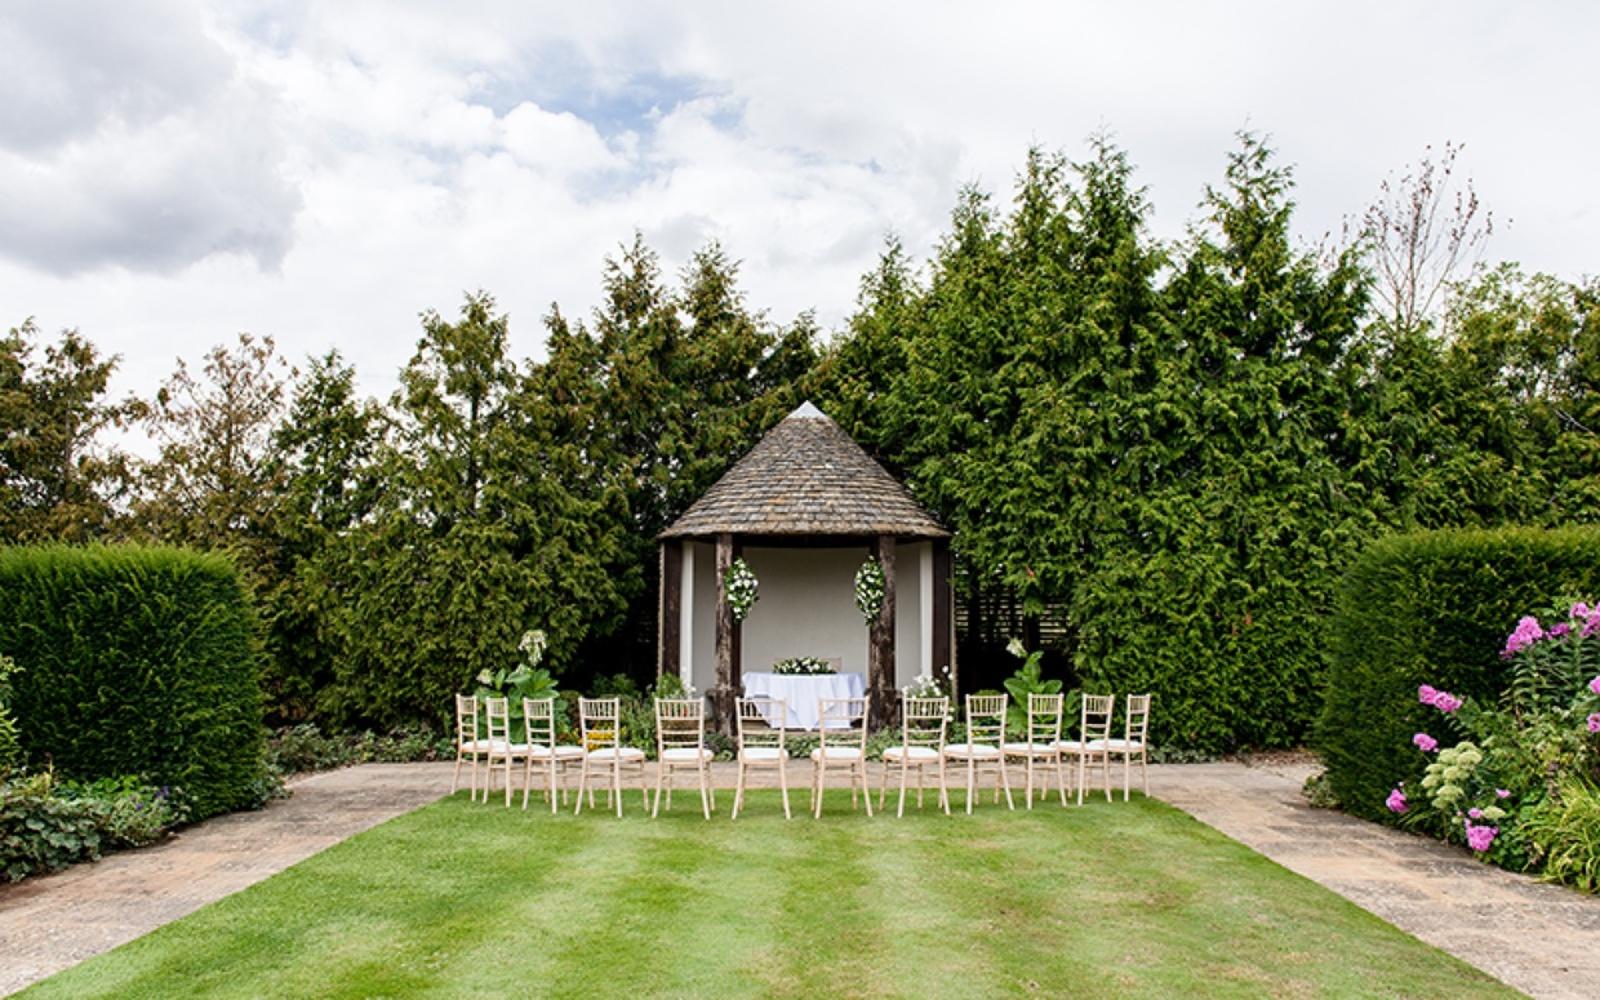 Real Wedding from Whitewed Directory approved wedding photographer duo of Cirencester Capture Every Moment outdoor ceremony at Whatley Manor